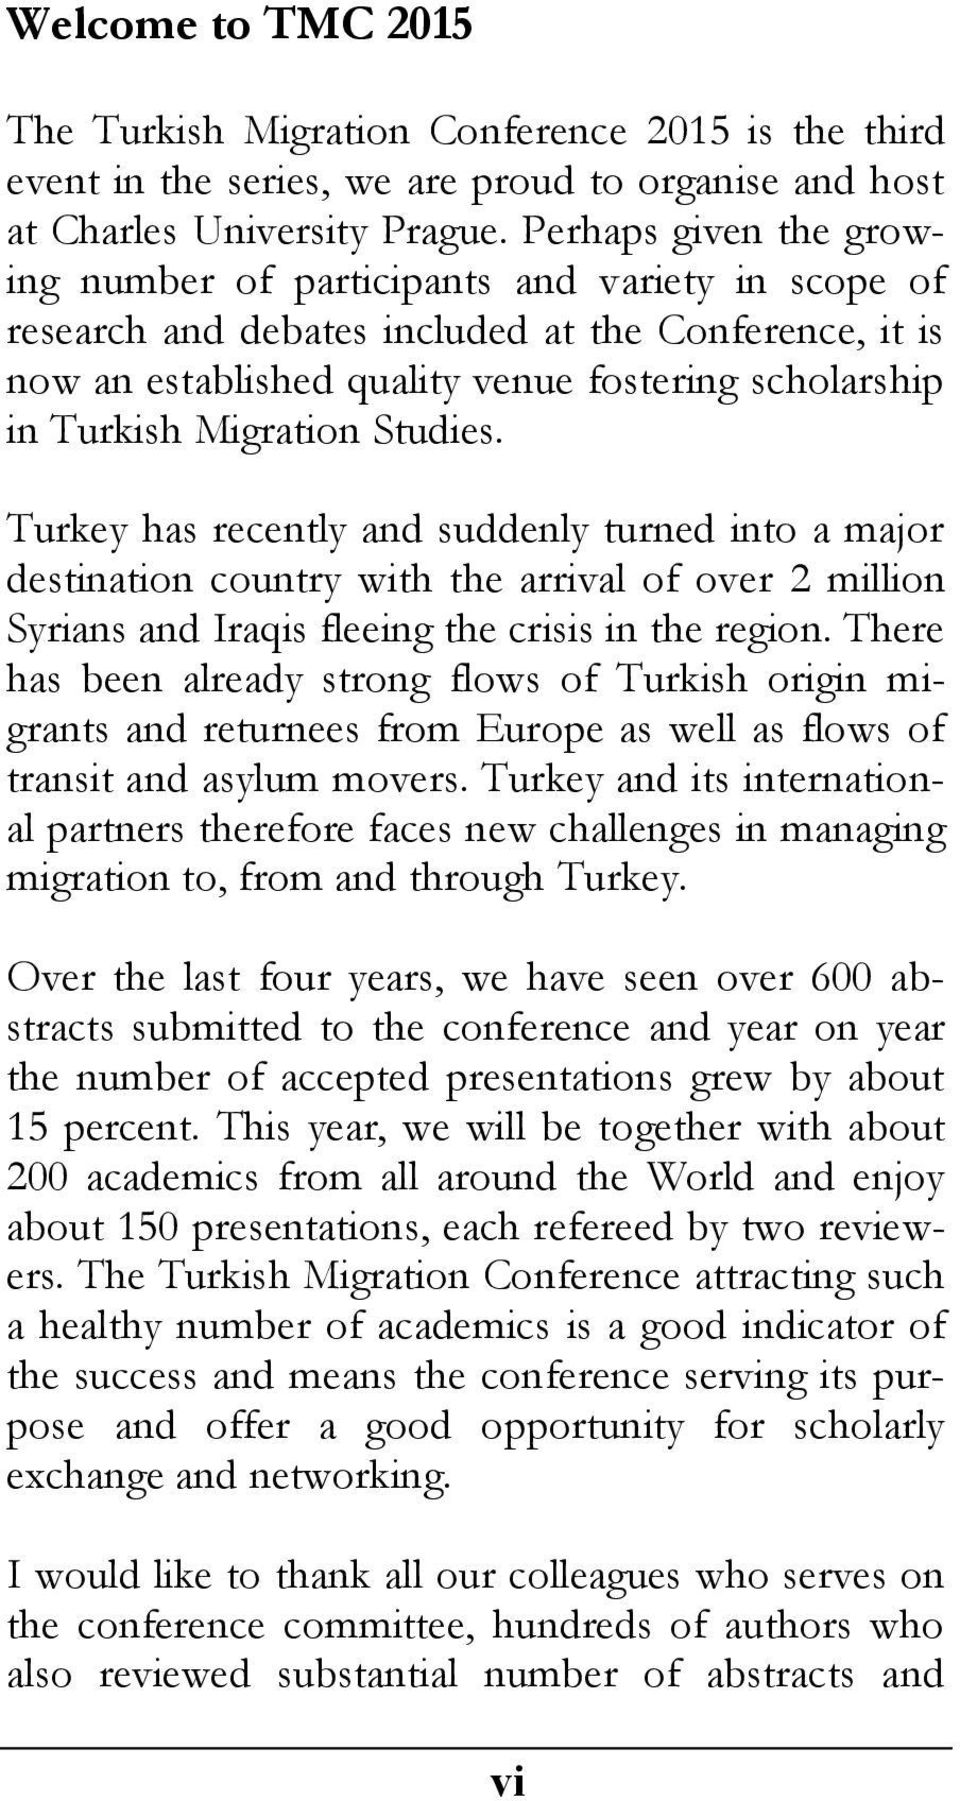 Migration Studies. Turkey has recently and suddenly turned into a major destination country with the arrival of over 2 million Syrians and Iraqis fleeing the crisis in the region.